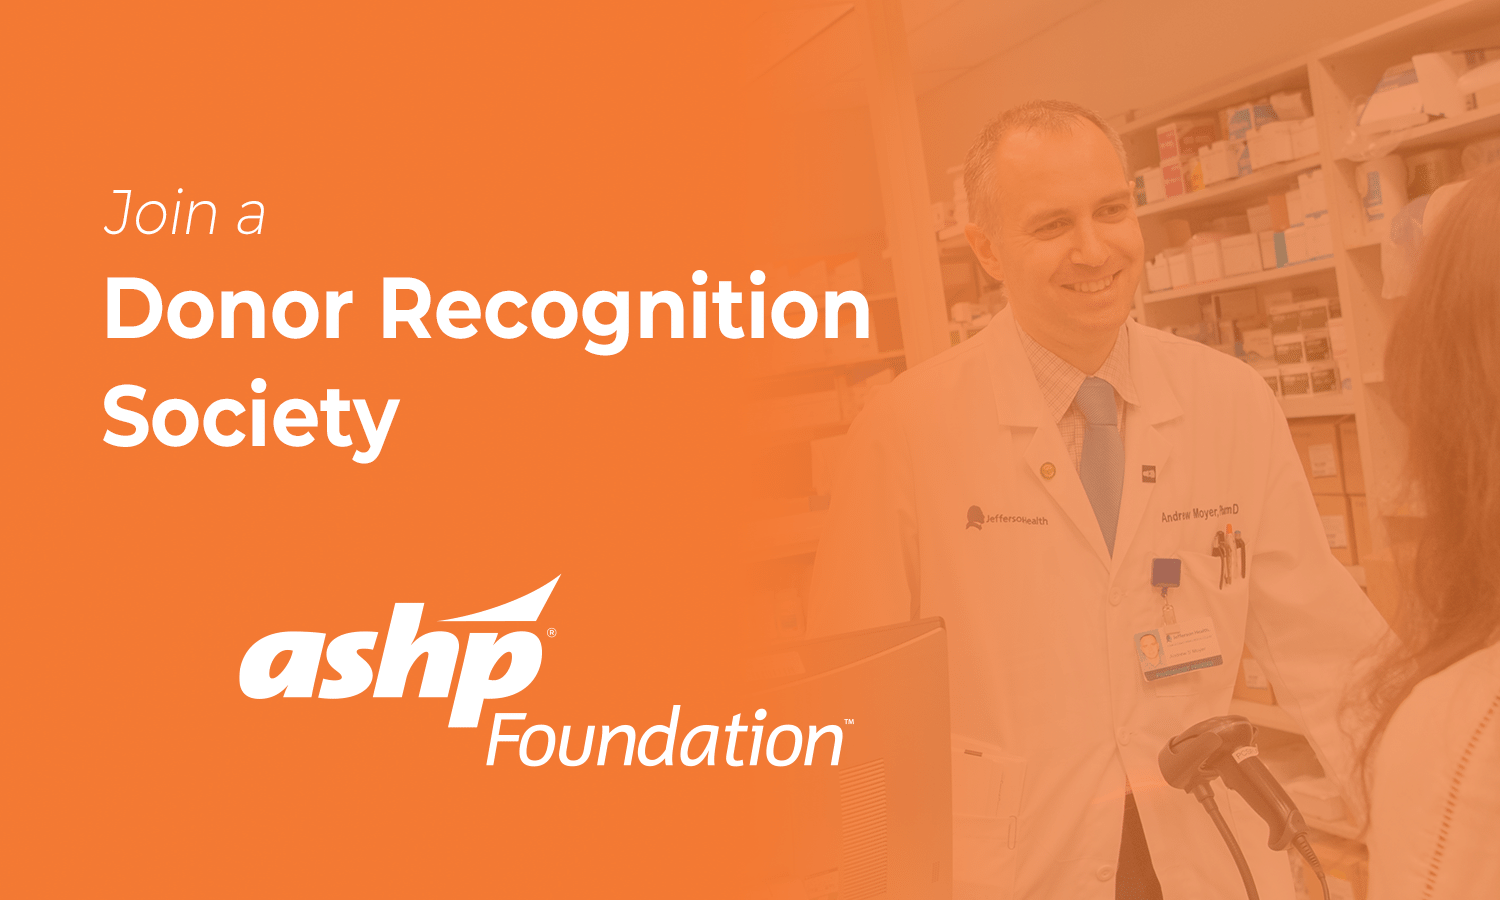 join a donor recognition society - ashp foundation